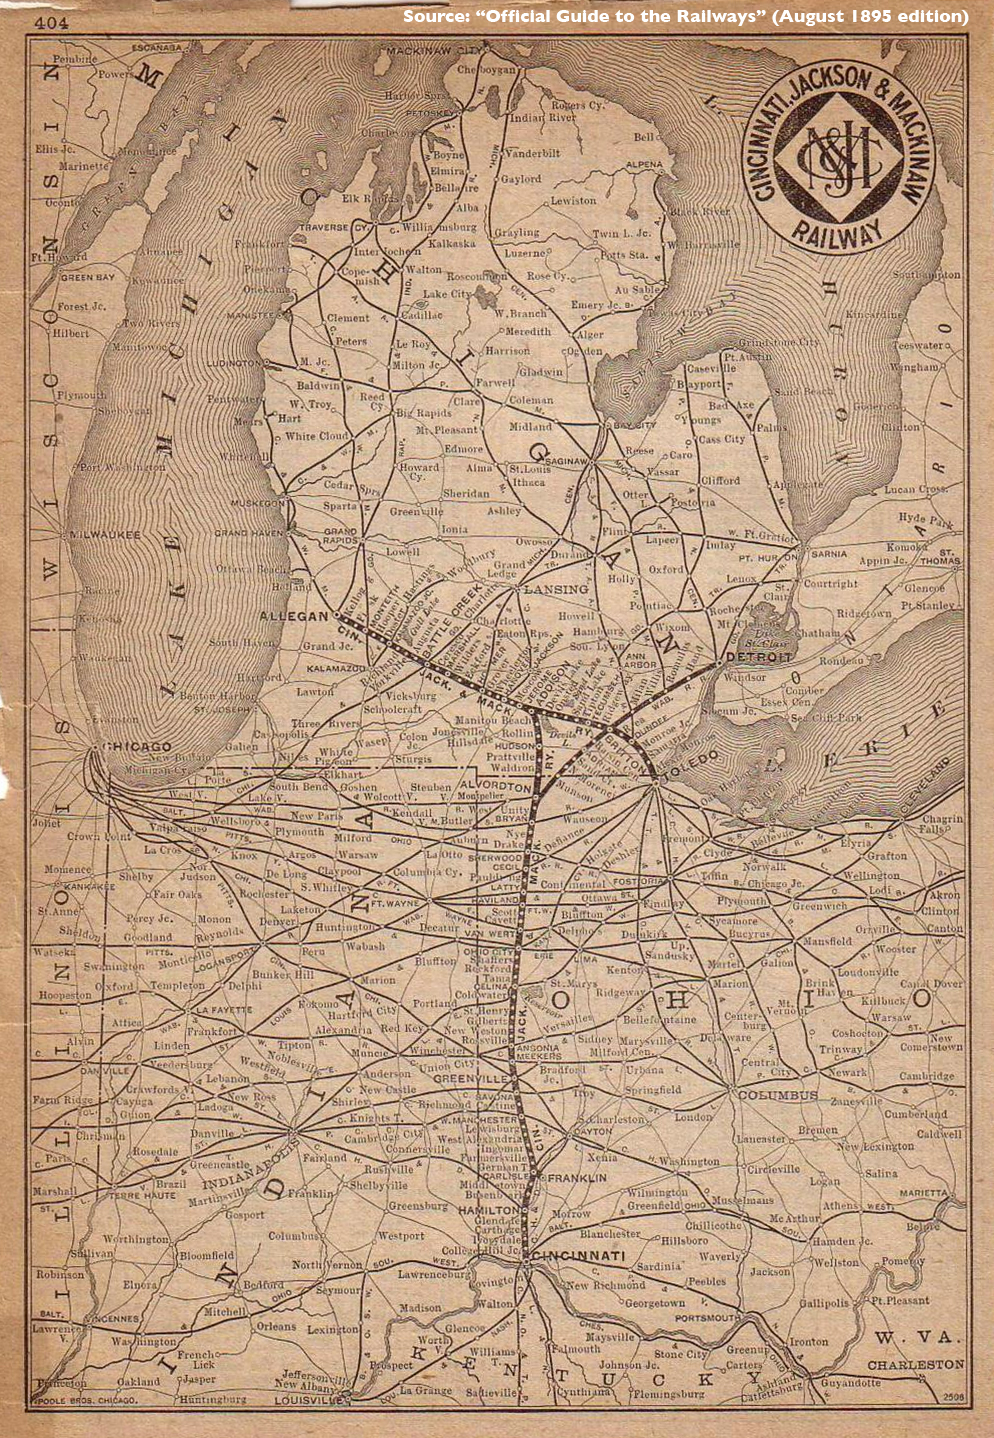 CJ&M map from 1895